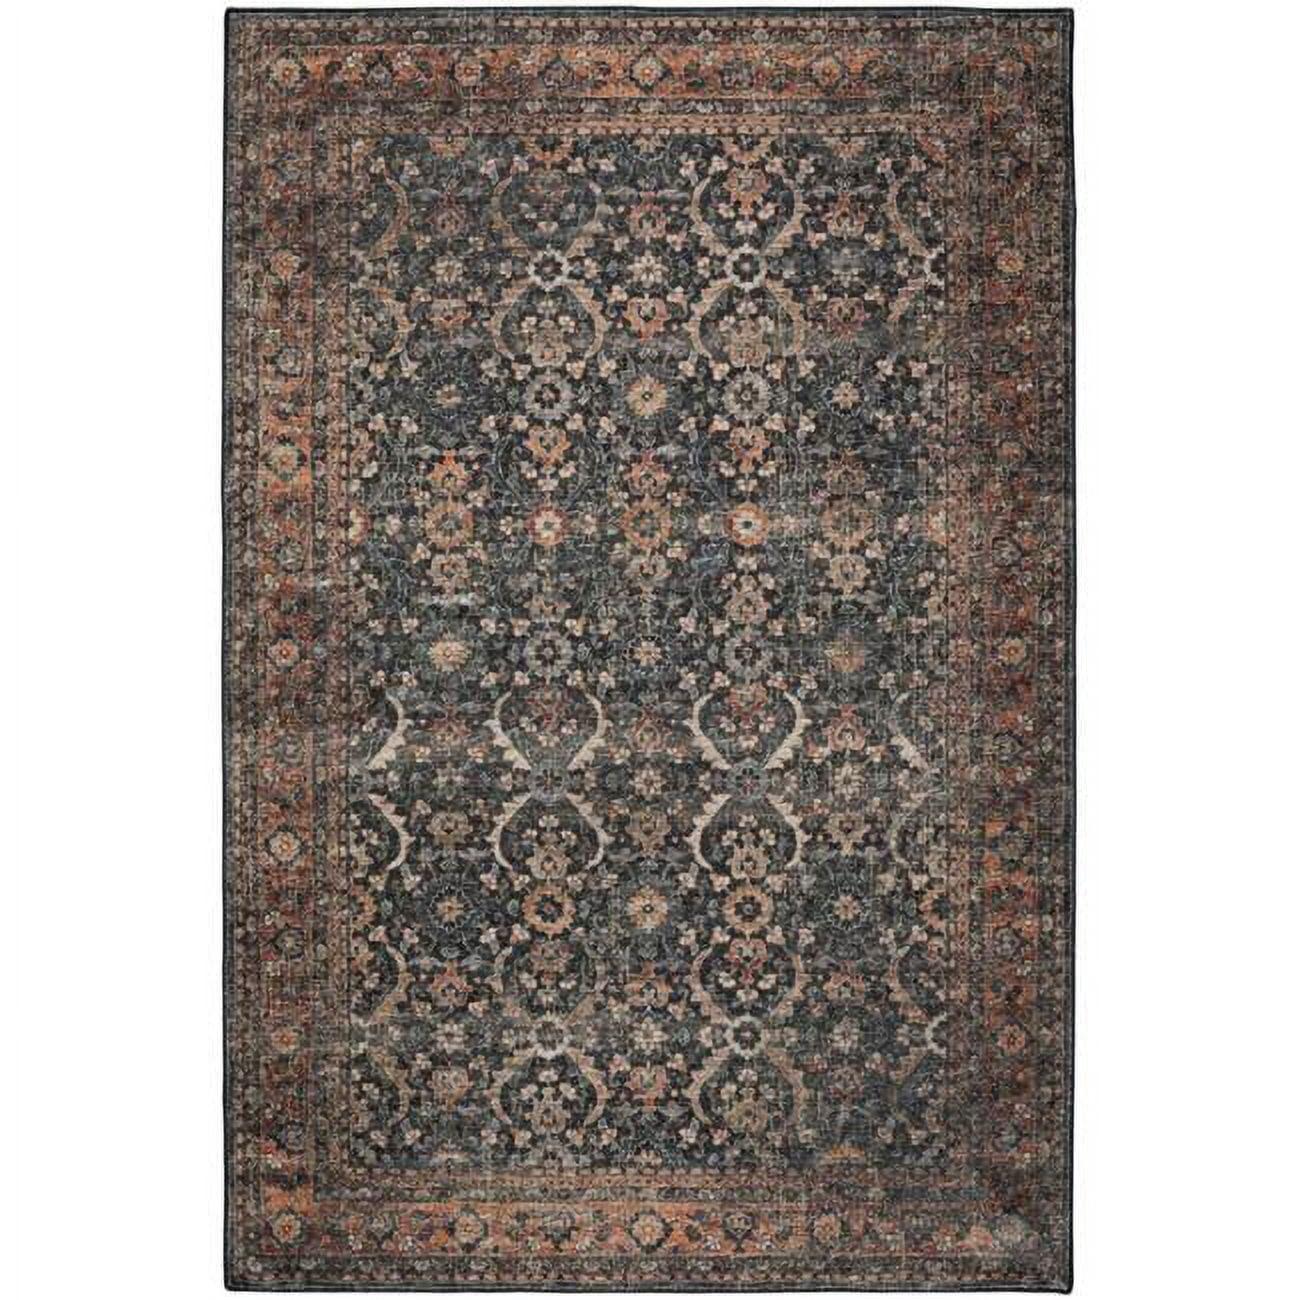 Charcoal Synthetic 9' x 12' Tufted Rectangular Rug with Non-Slip Backing